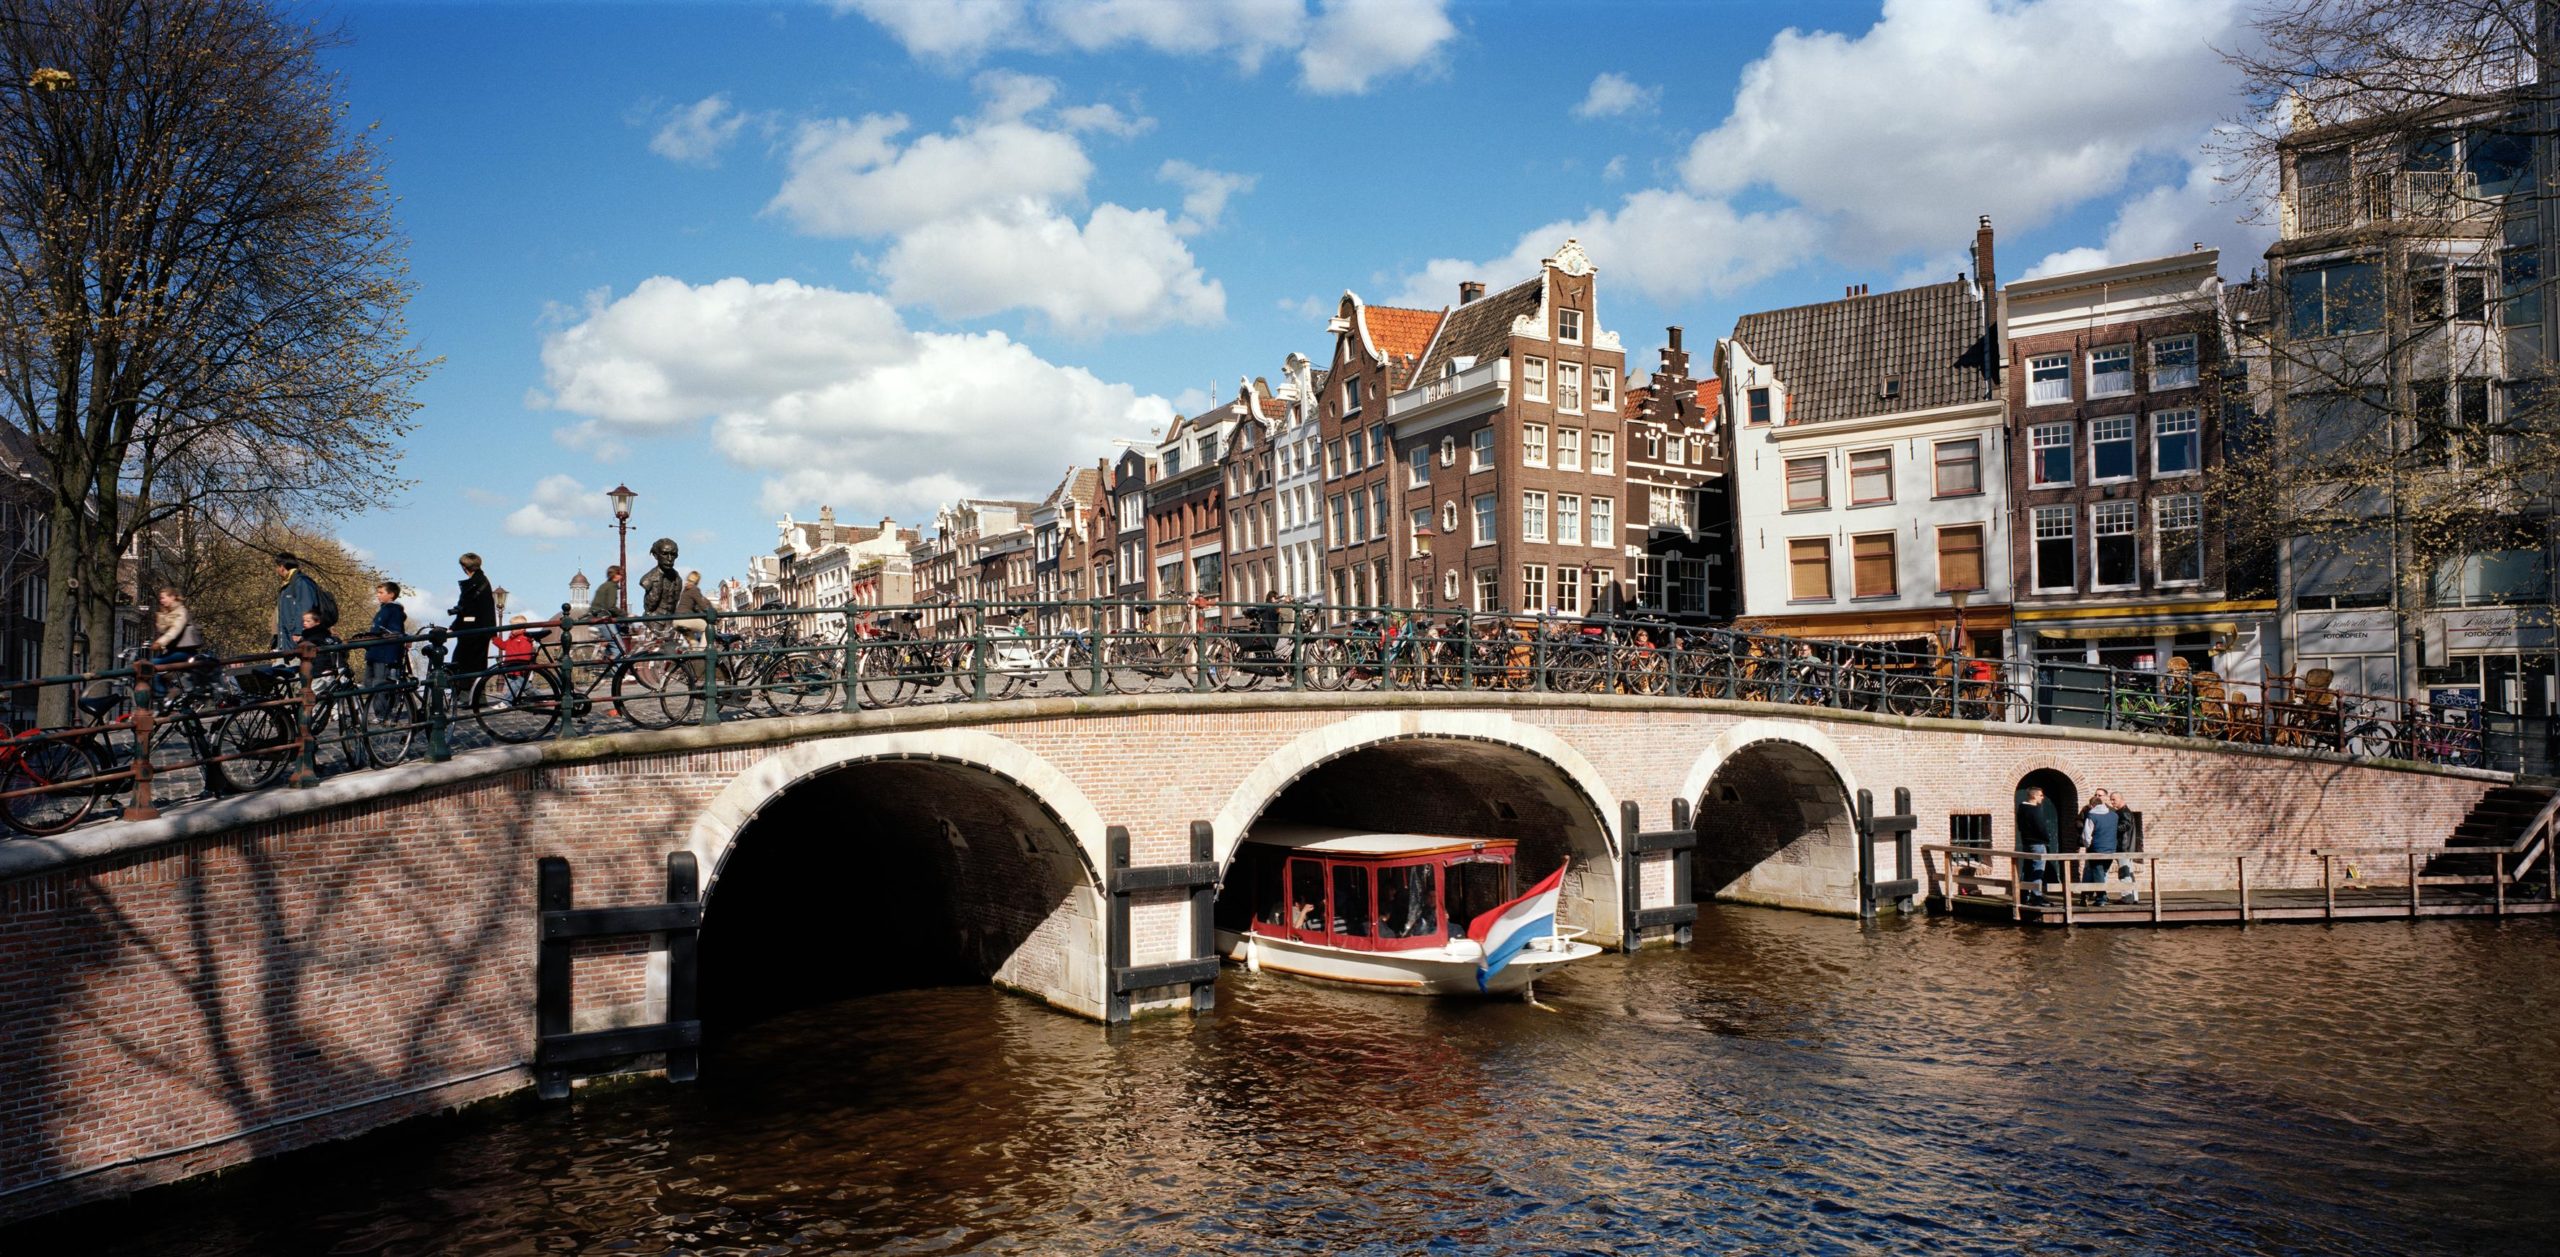 THE 10 CLOSEST Hotels to Amsterdam Canal Ring